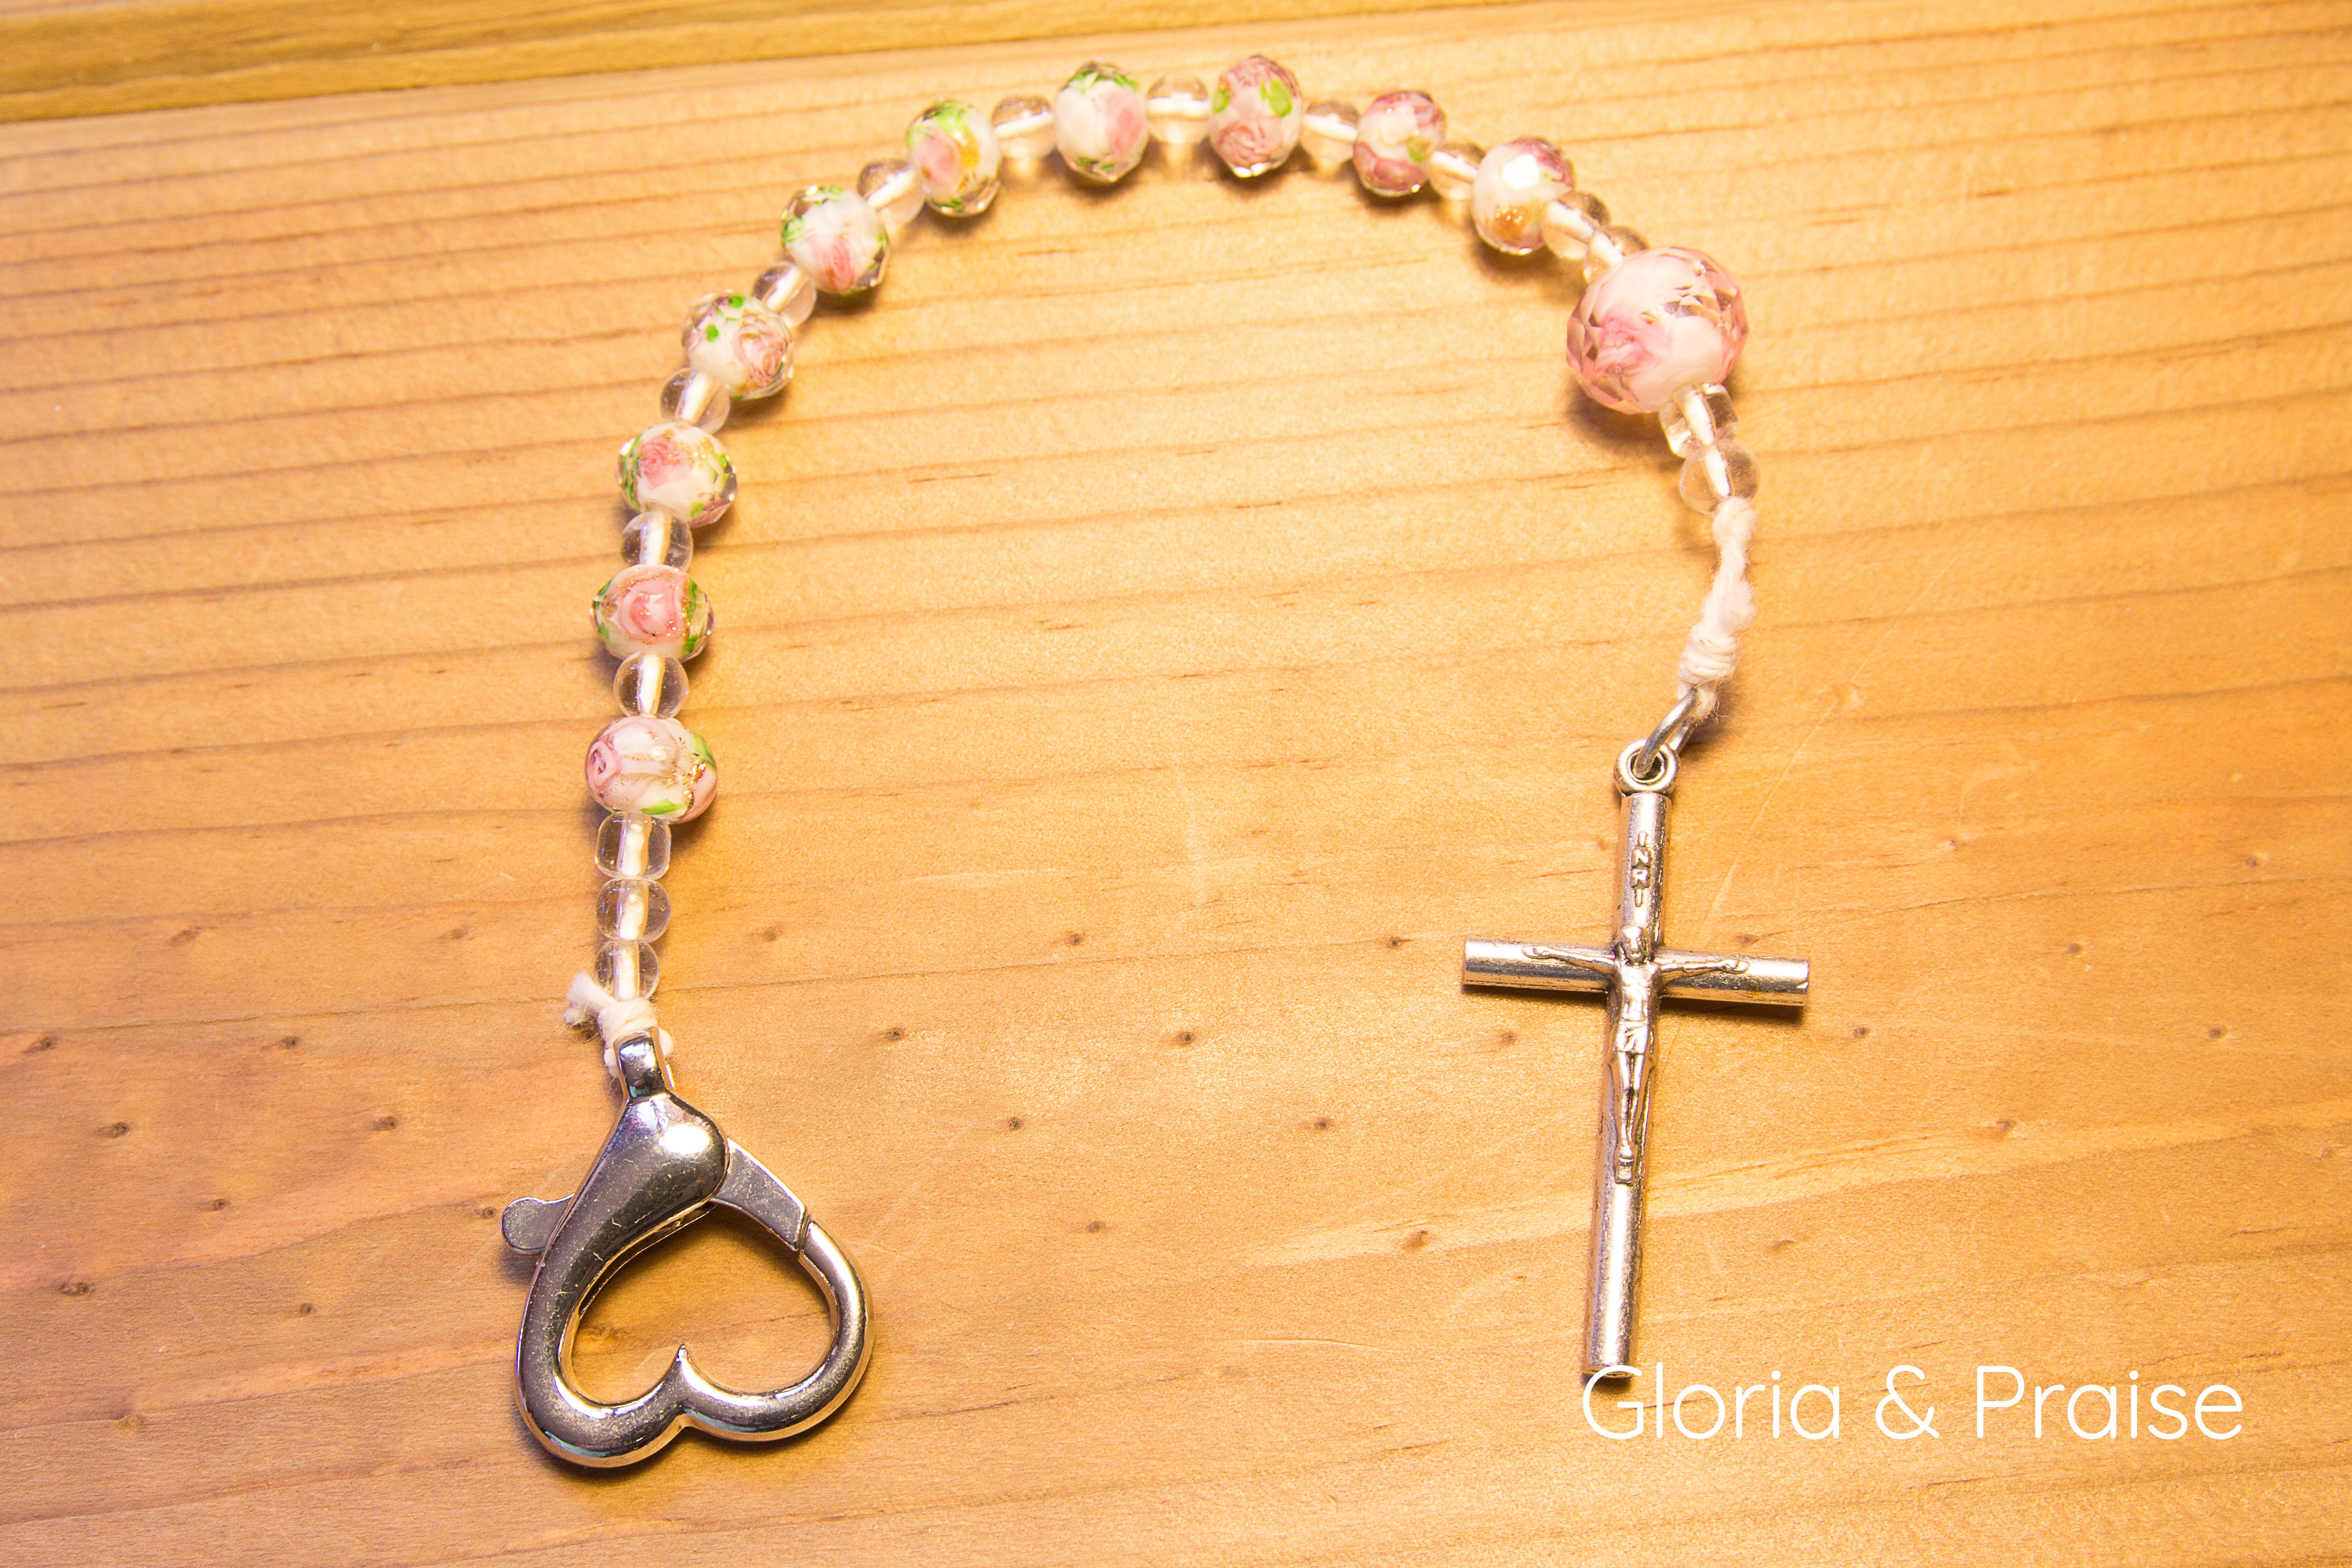 "The Little Flower" Single Decade Rosary